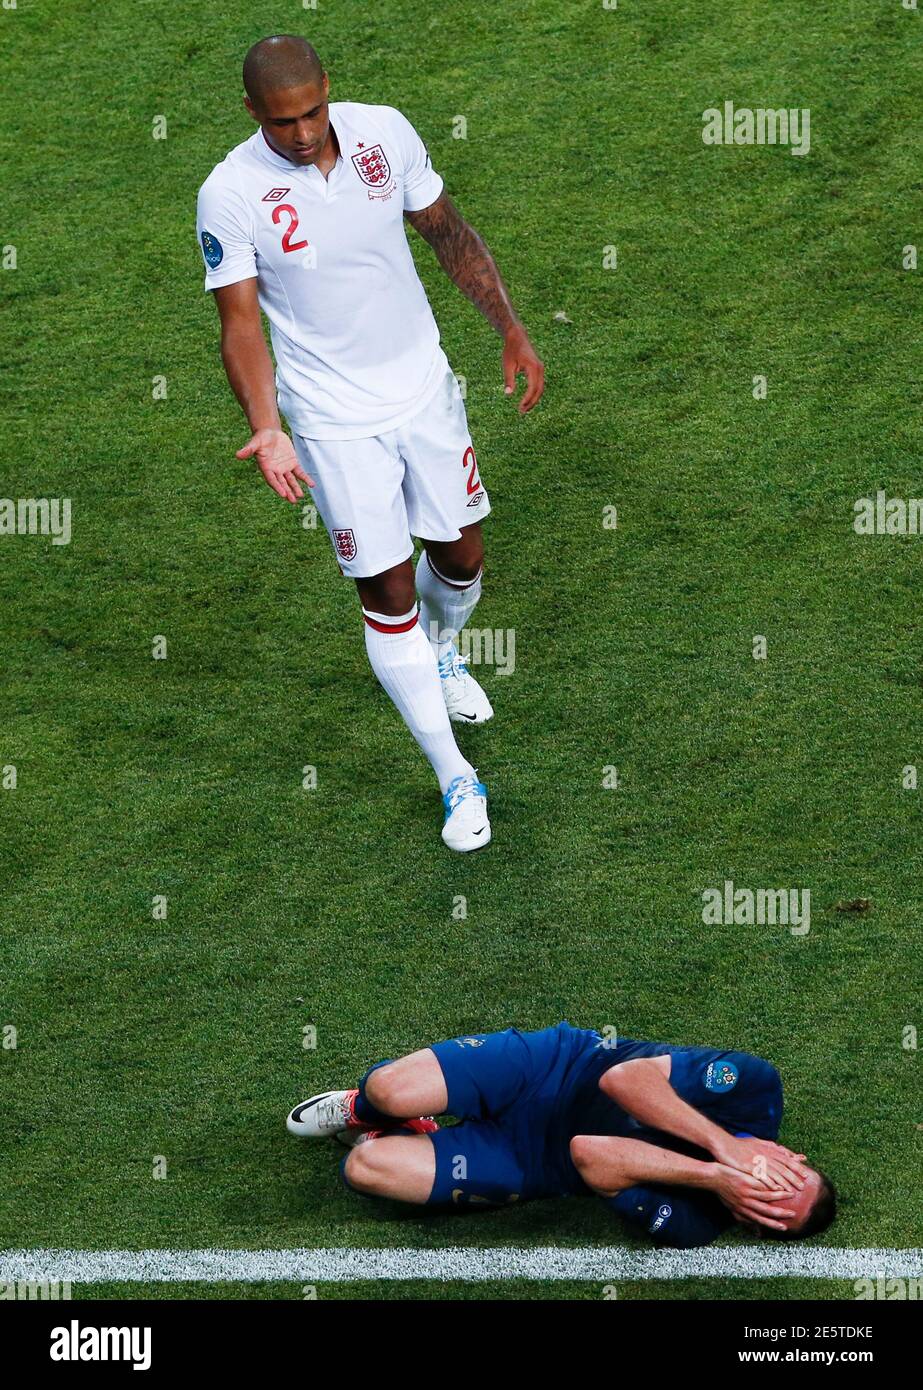 England's Glen Johnson (top) gestures at France's Franck Ribery during the Euro 2012 Group D soccer match at Donbass Arena in Donetsk, June 11, 2012.     REUTERS/Alessandro Bianchi (UKRAINE  - Tags: SPORT SOCCER) Stock Photo